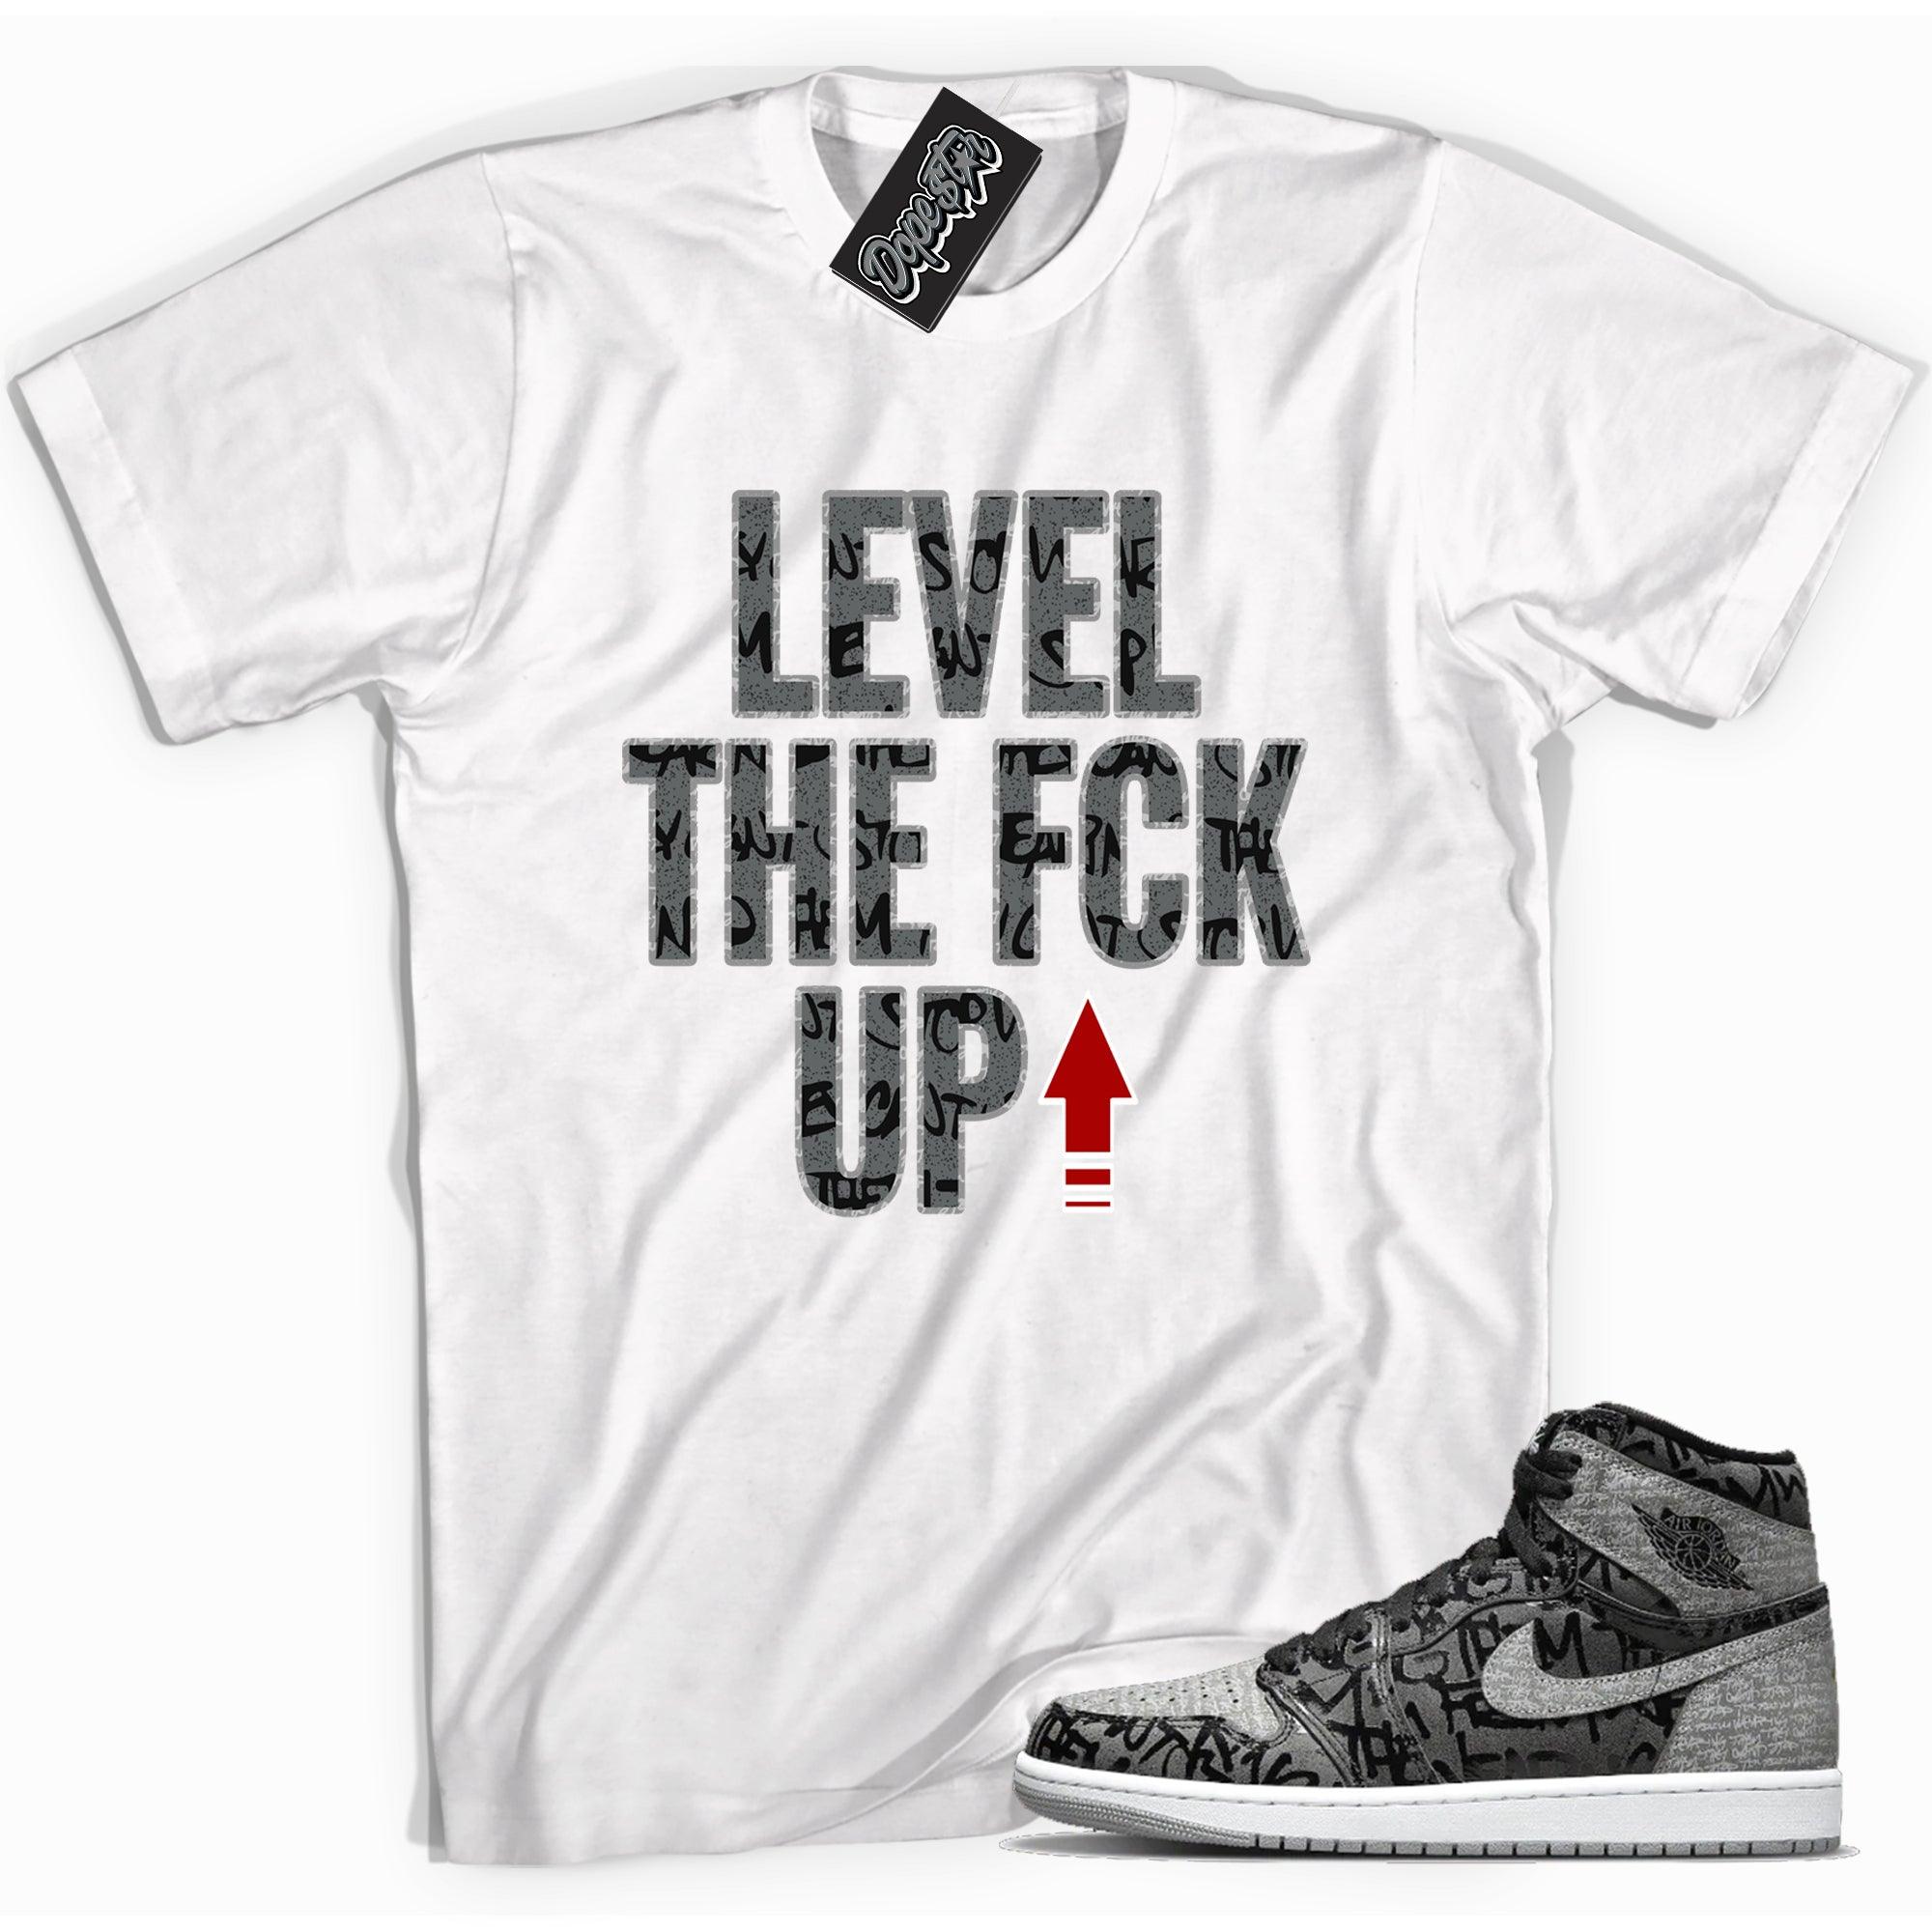 Cool white graphic tee with 'level up' print, that perfectly matches Air Jordan 1 High OG Rebellionaire sneakers.